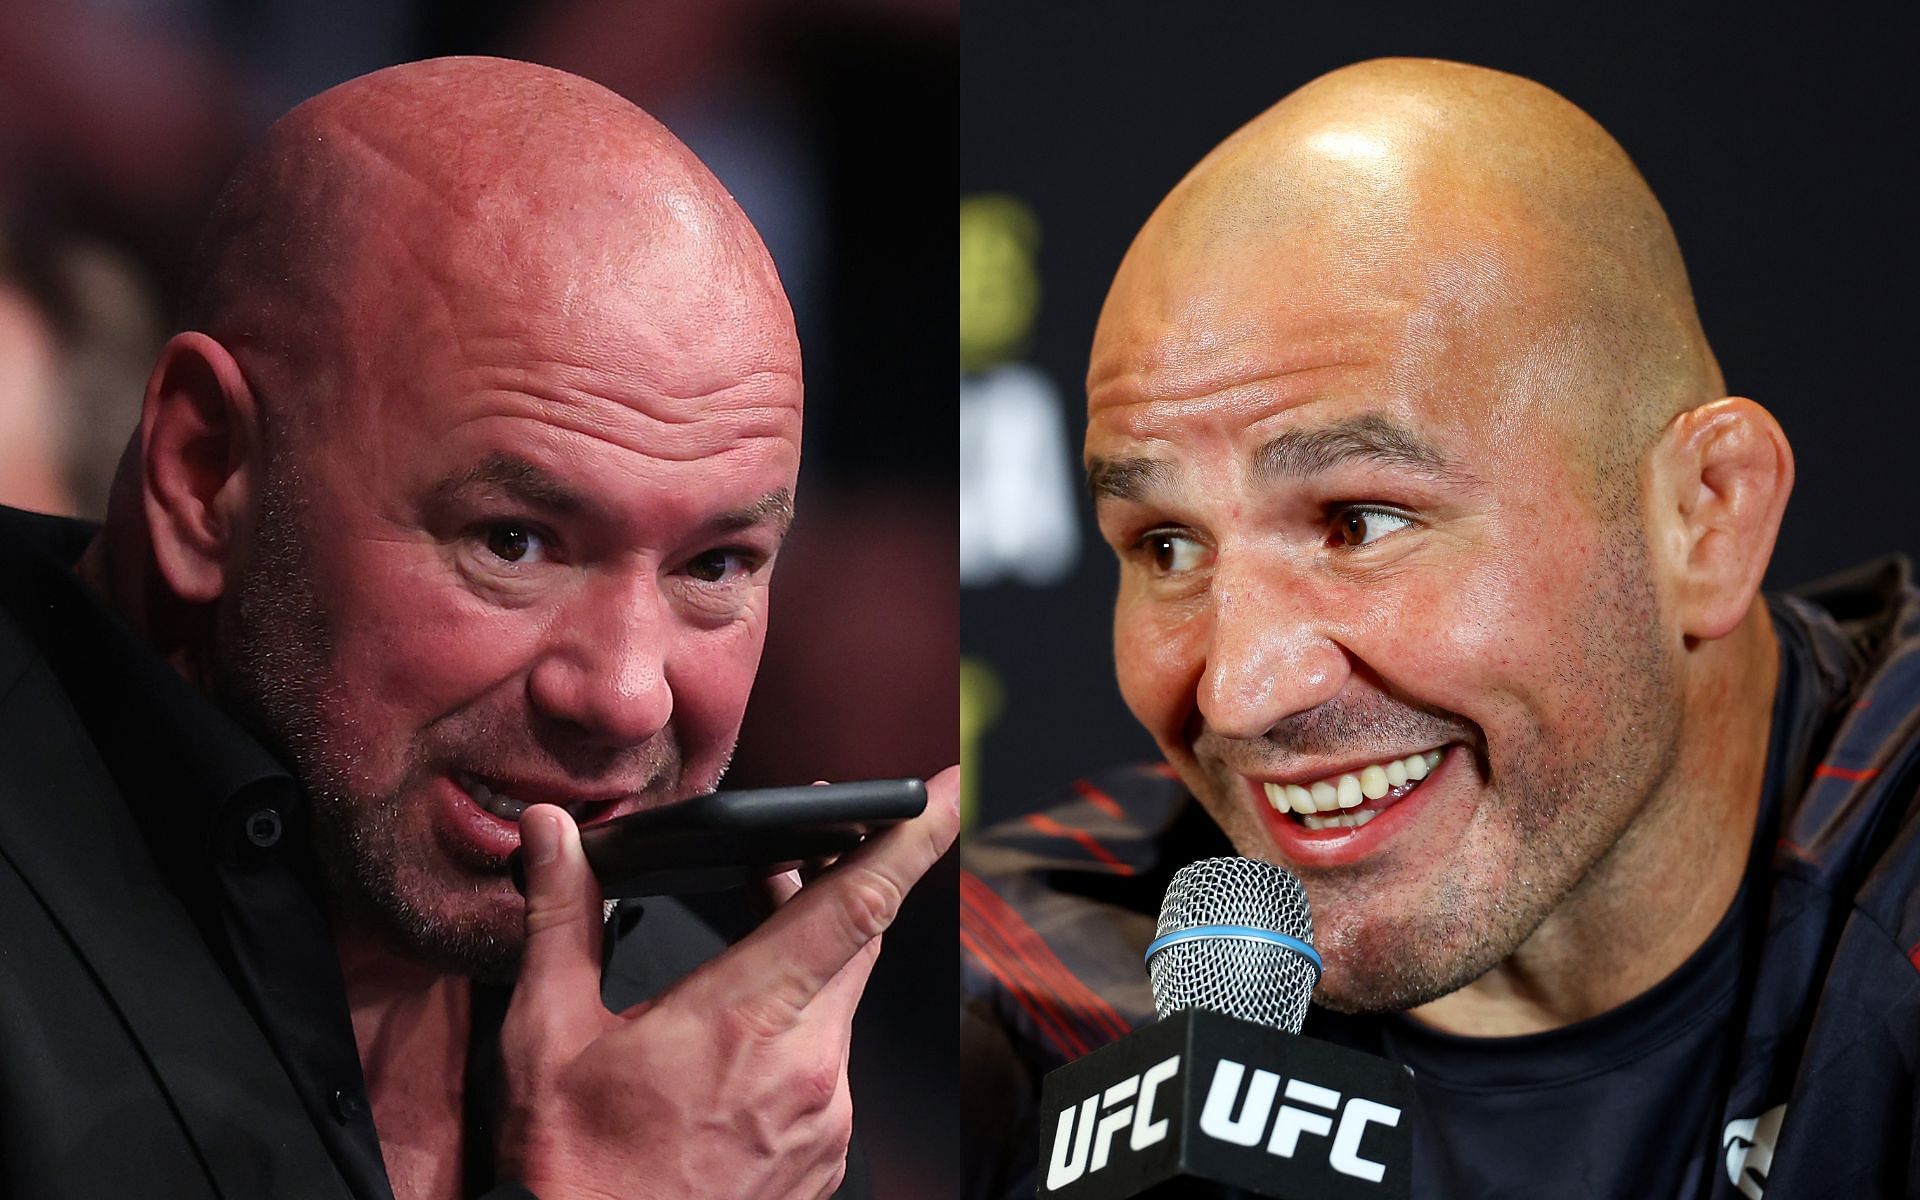 Dana White (Left) and Glover Teixeira (Right)